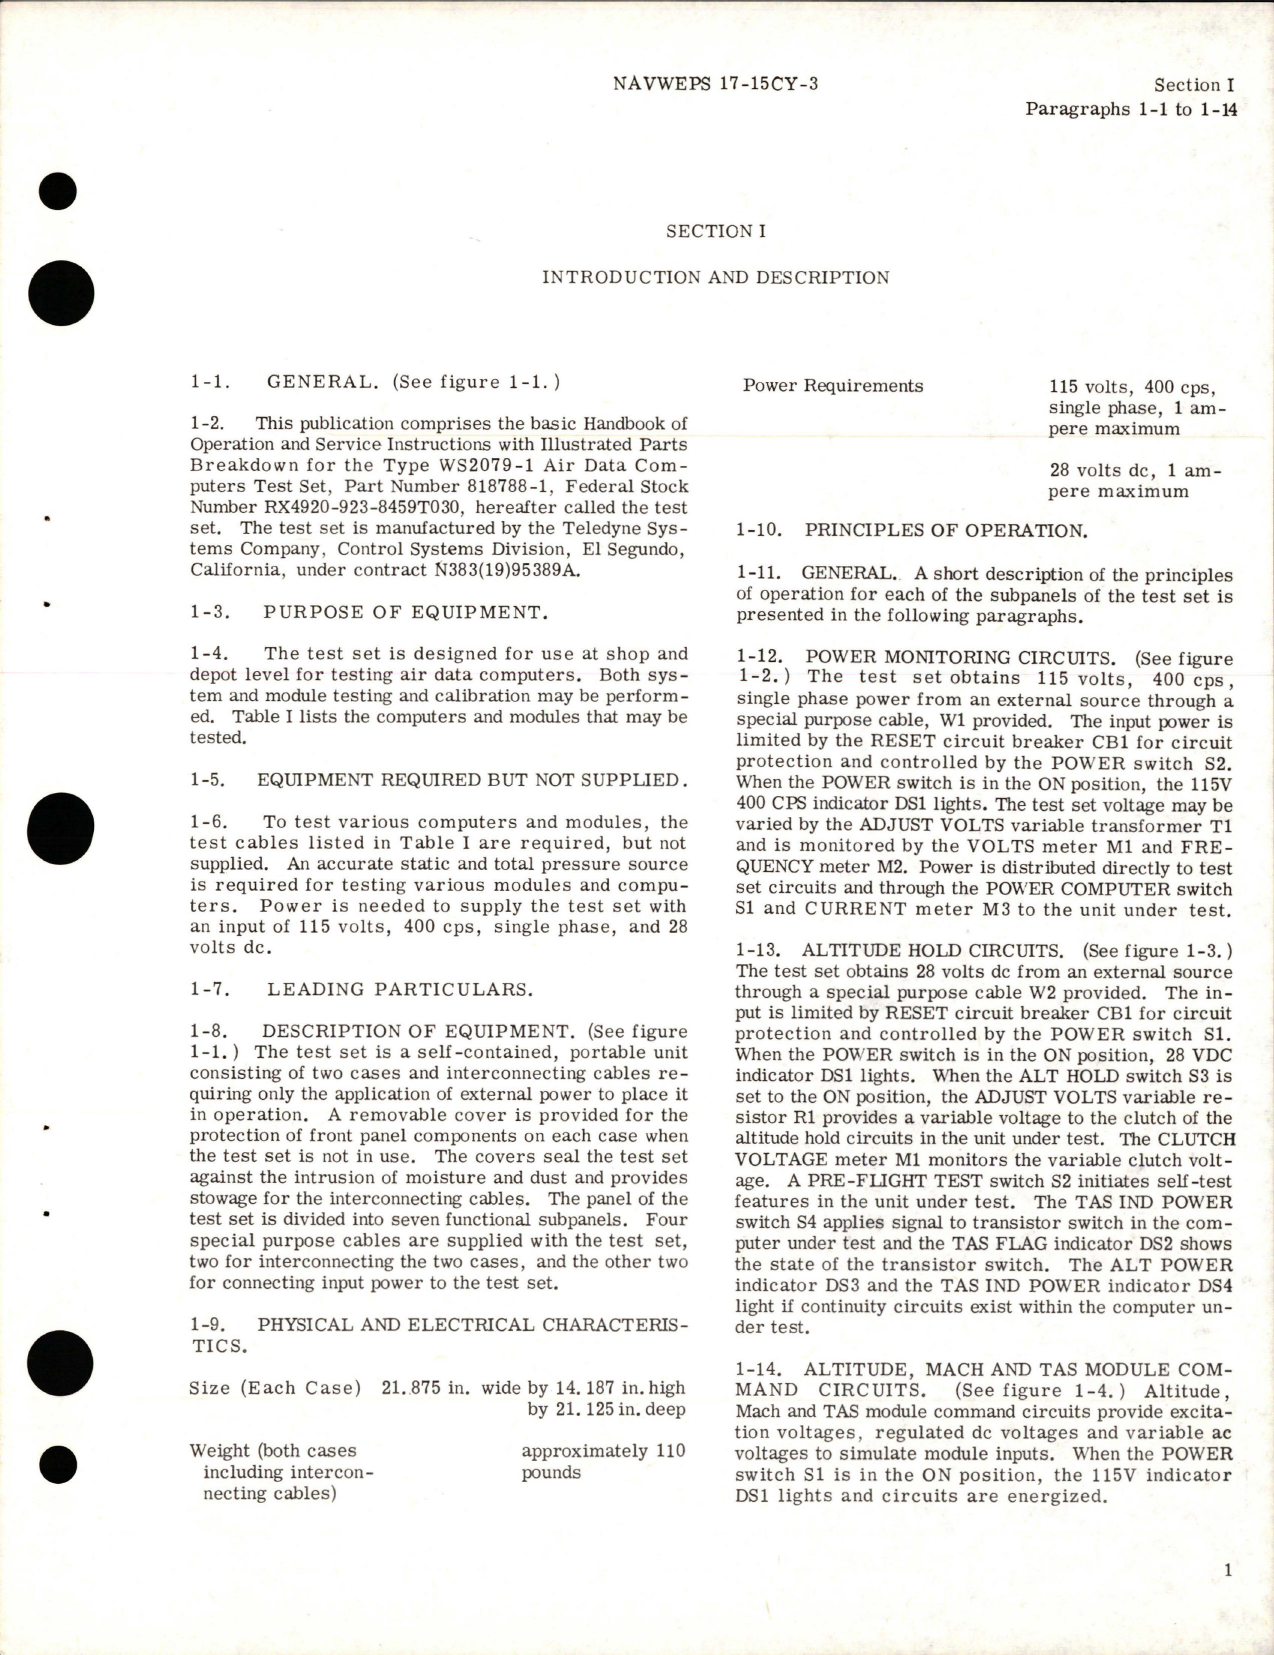 Sample page 5 from AirCorps Library document: Operation and Service Instructions with Parts for Air Data Computers Test Set - Type WS2079-1, Part 818788-1 